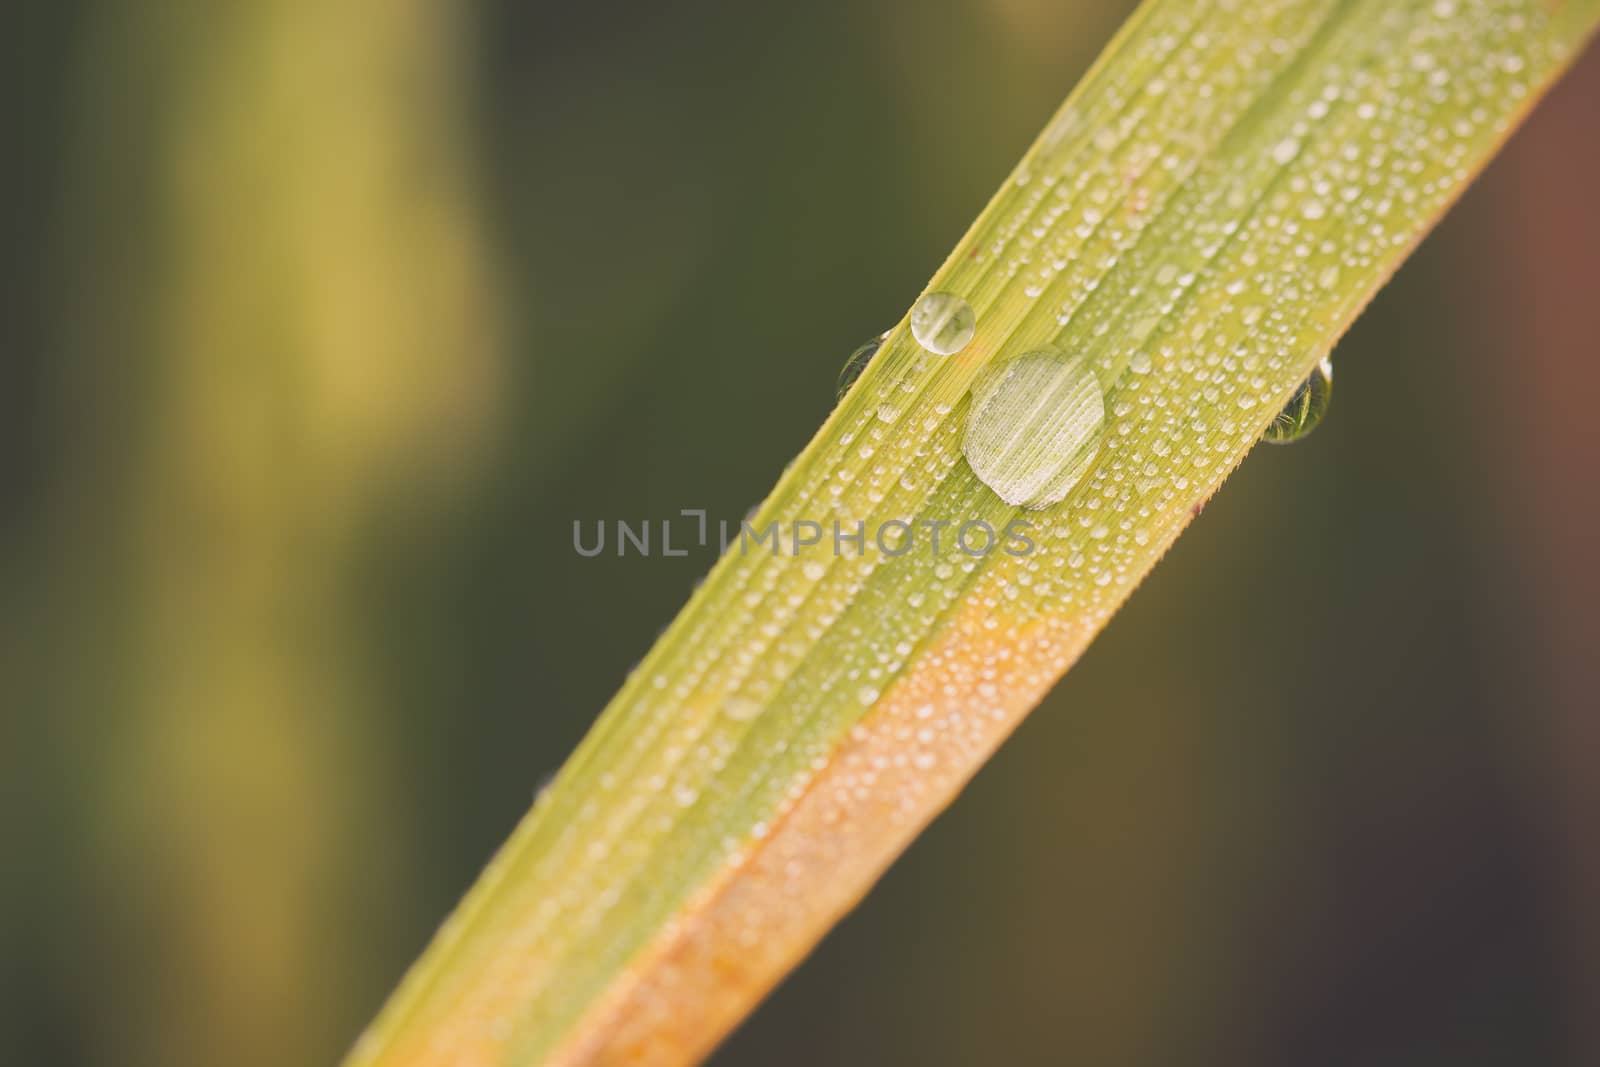 Drops of dew on rice leaves in rice fields and morning sunlight. Concept of rainy season and agriculture.